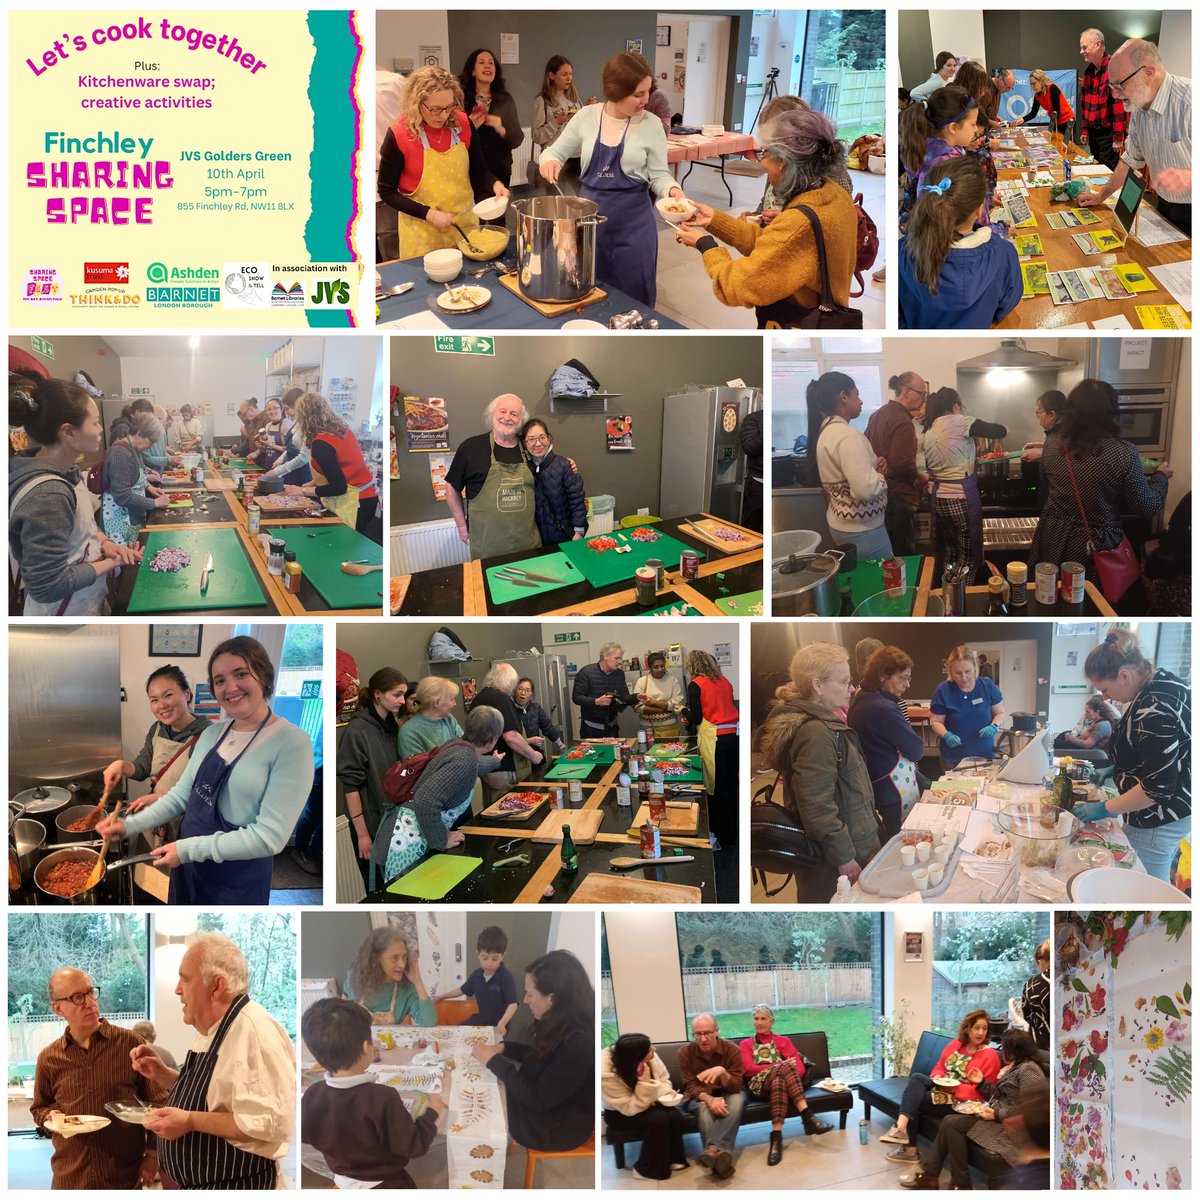 Our first 'Let's Cook Together' event at JVS, Finchley Sharing Space. Cooking vegan food, learning about waste reduction, decorating using food-waste and swapping 2nd-hand kitchenware. Thank you @Ashden_org @ThinkDoCamden @BarnetCouncil Kusuma Trust. 👉ecoshowandtell.org/events